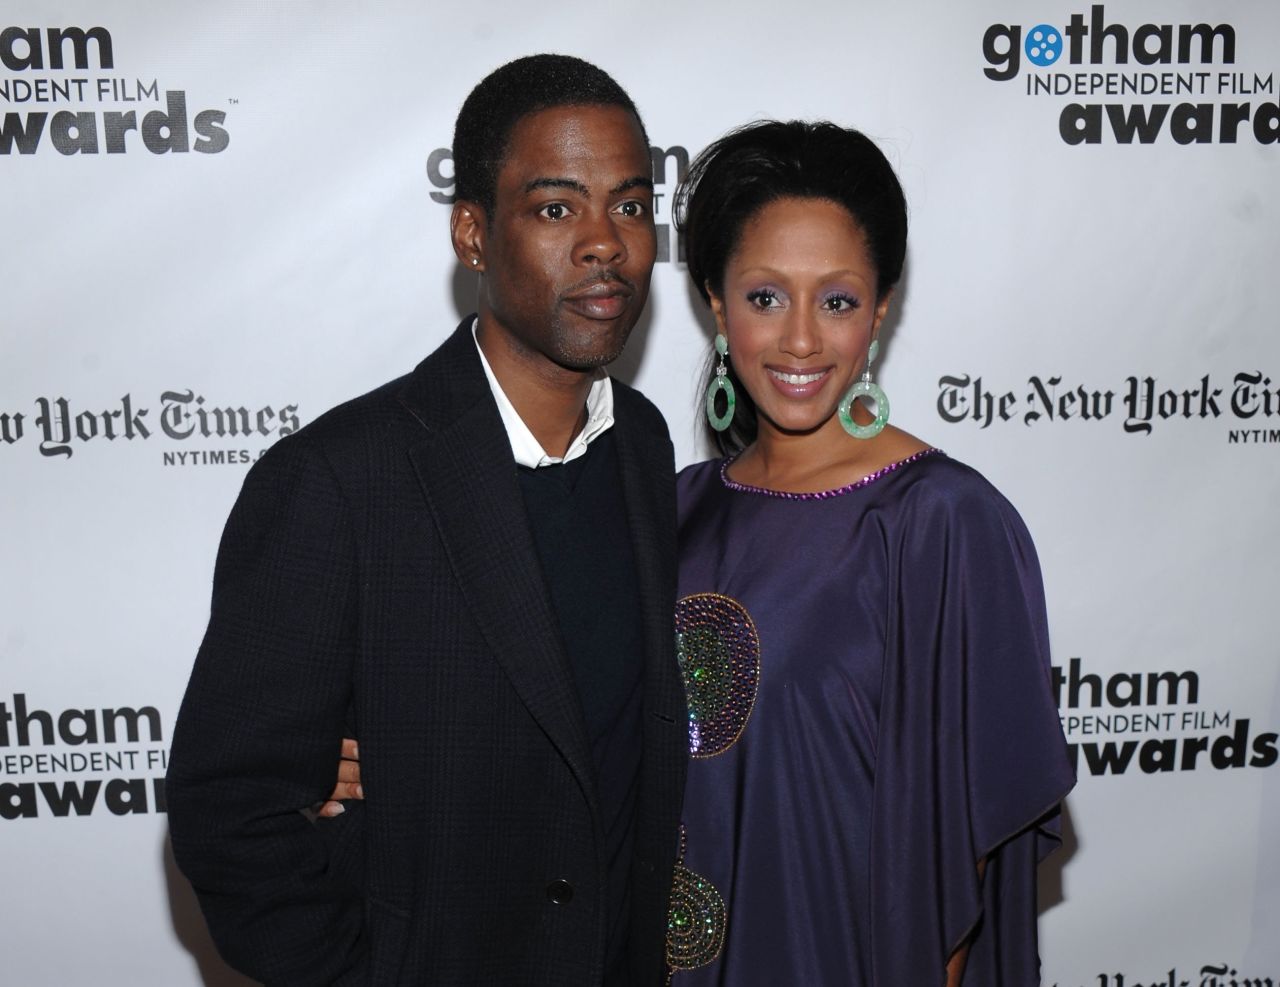 Comedian and actor Chris Rock filed for divorce from his wife, Malaak. They have been married 19 years and have two children. "Chris Rock has filed for divorce from his wife, Malaak," Rock's attorney, Robert S. Cohen, said in a statement. "This is a personal matter and Chris requests privacy as he and Malaak work through this process and focus on their family."